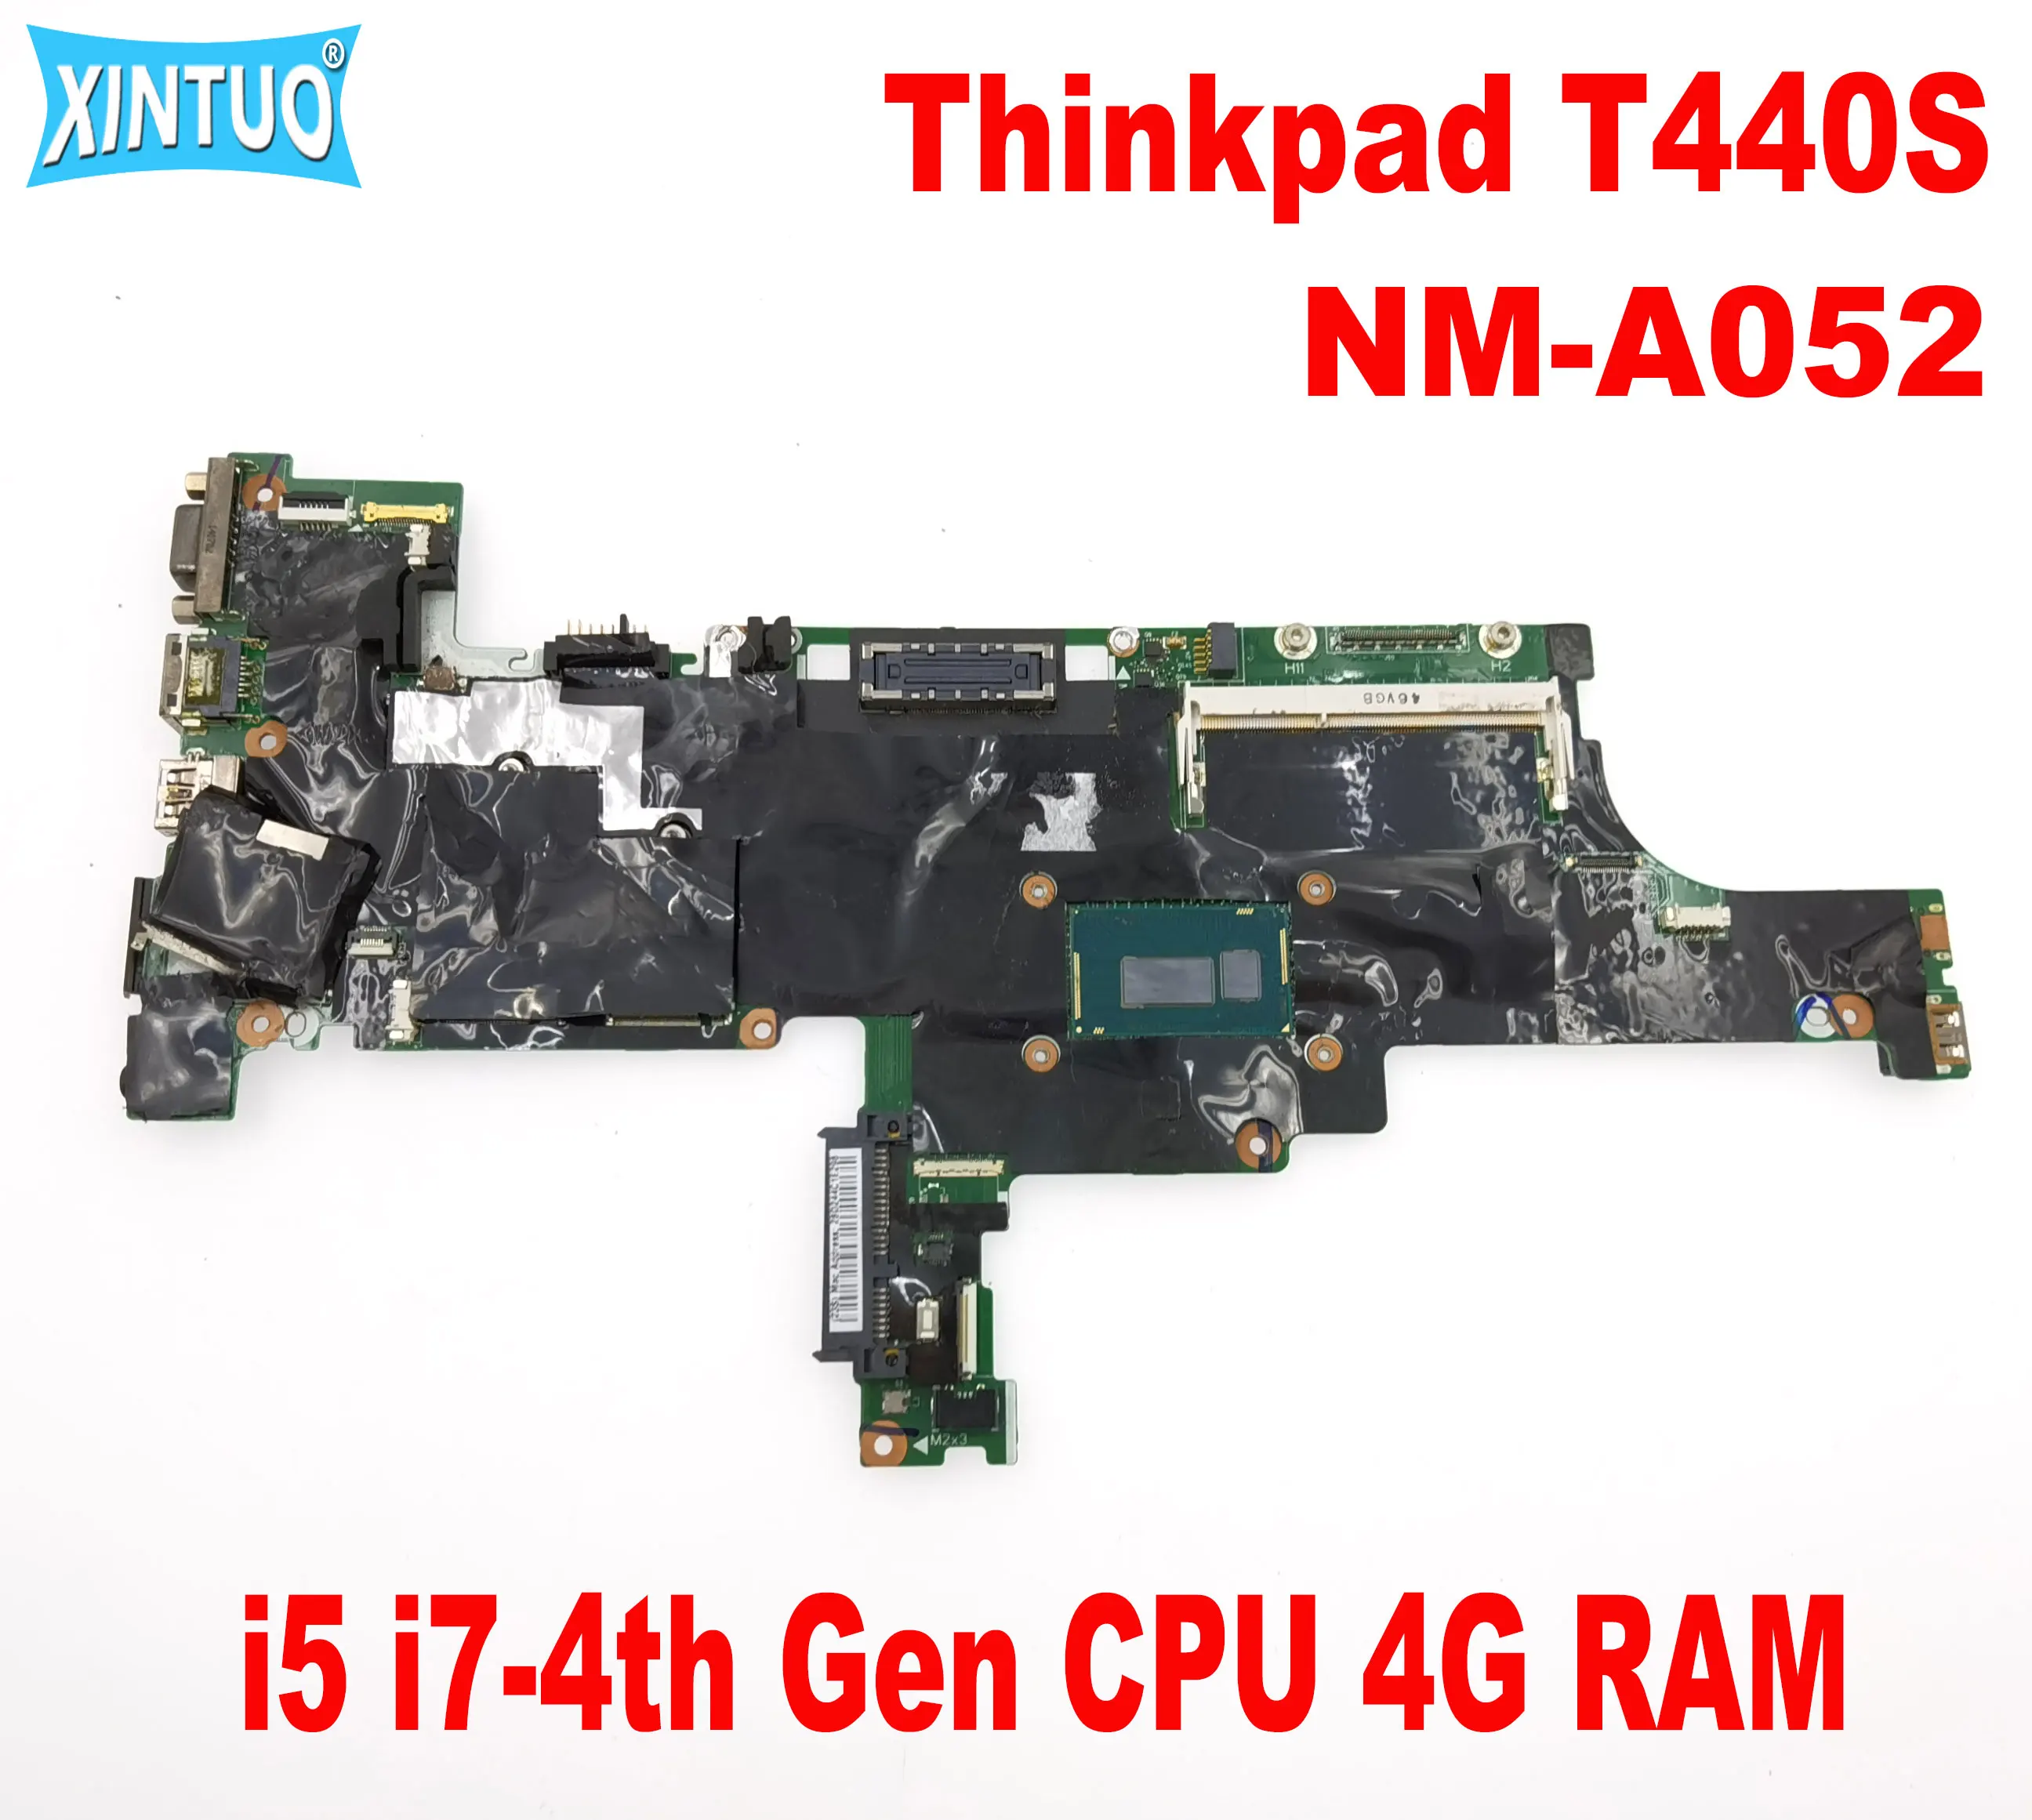 

VILT0 NM-A052 Mainboard for Lenovo Thinkpad T440S laptop motherboard 04X3886 04X3888 04X3905 with i5 i7-4th Gen CPU 4G RAM DDR3